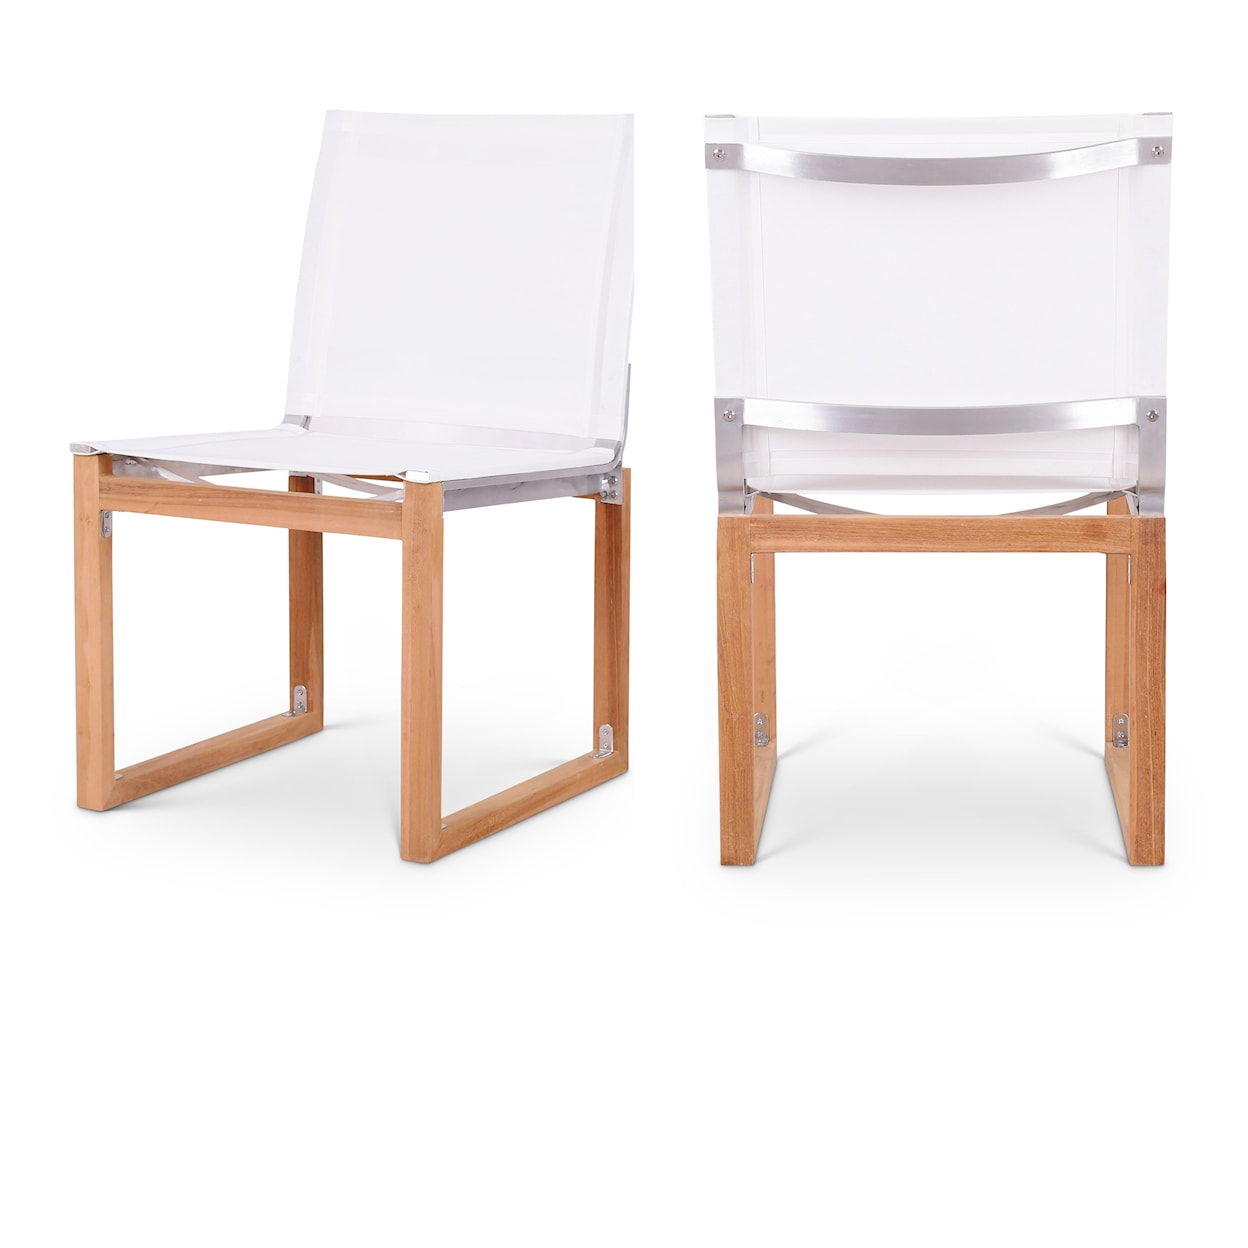 Meridian Furniture Tulum Dining Side Chair